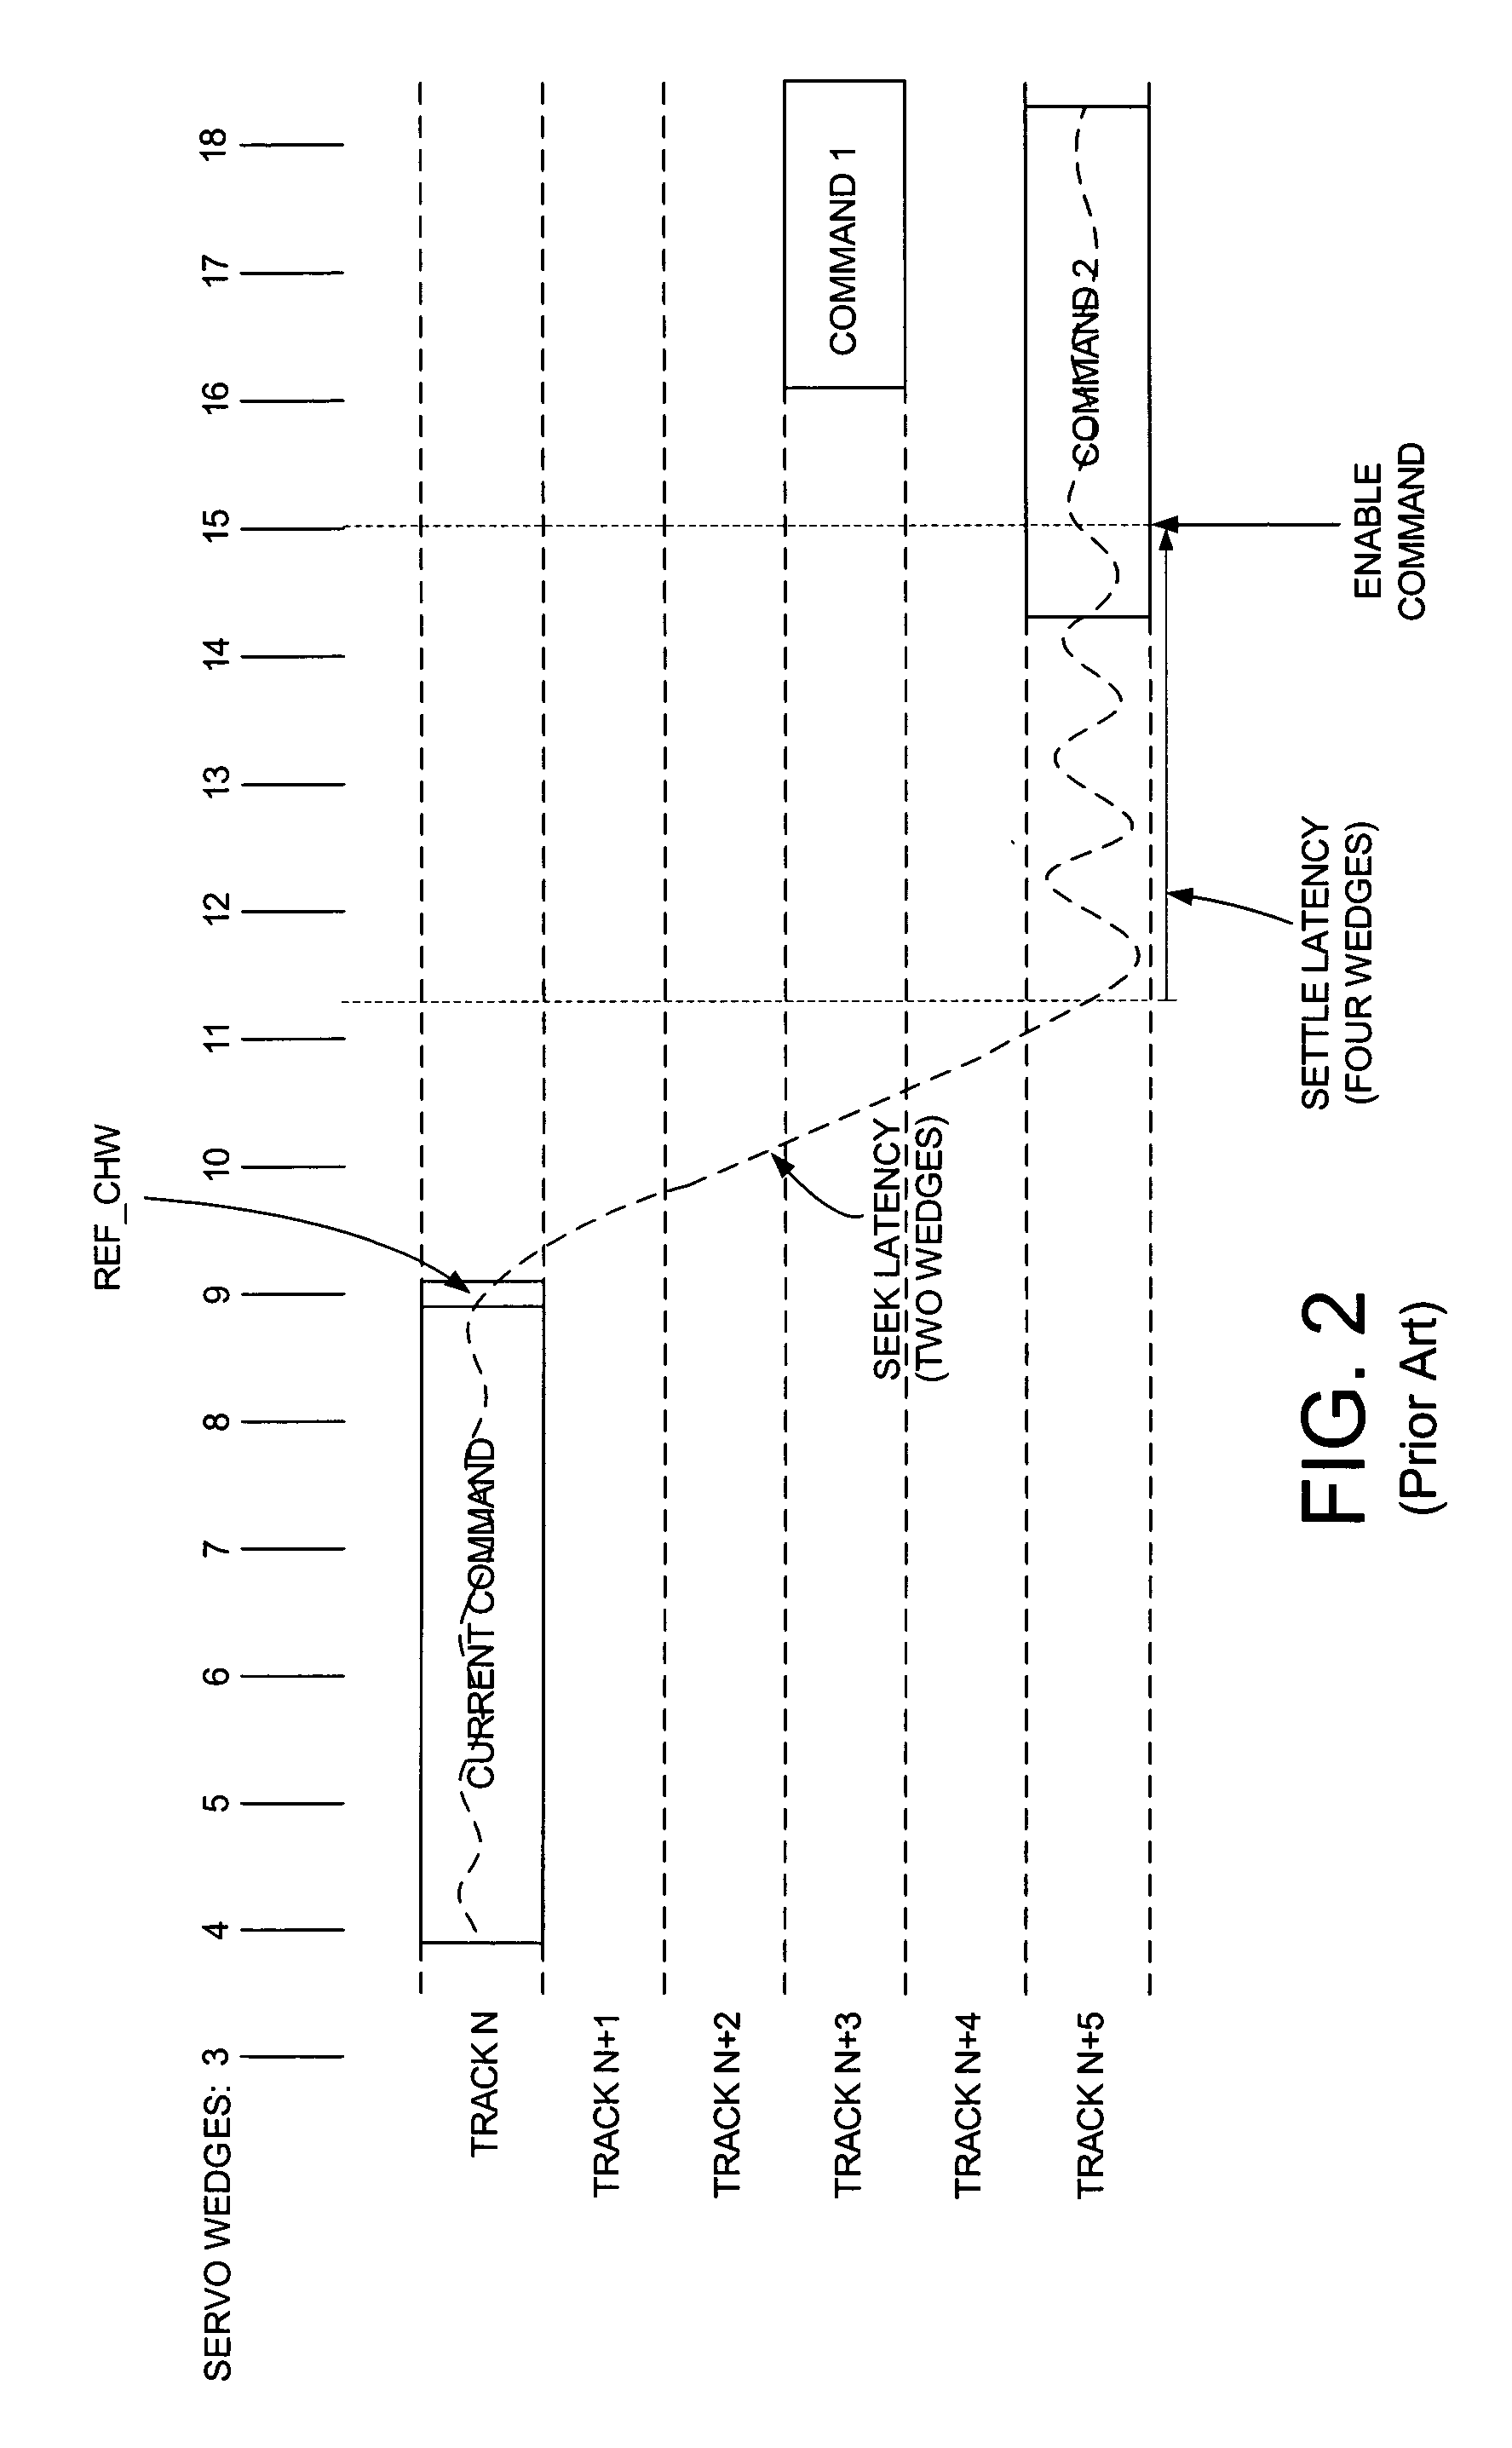 Disk drive employing a modified rotational position optimization algorithm to account for external vibrations